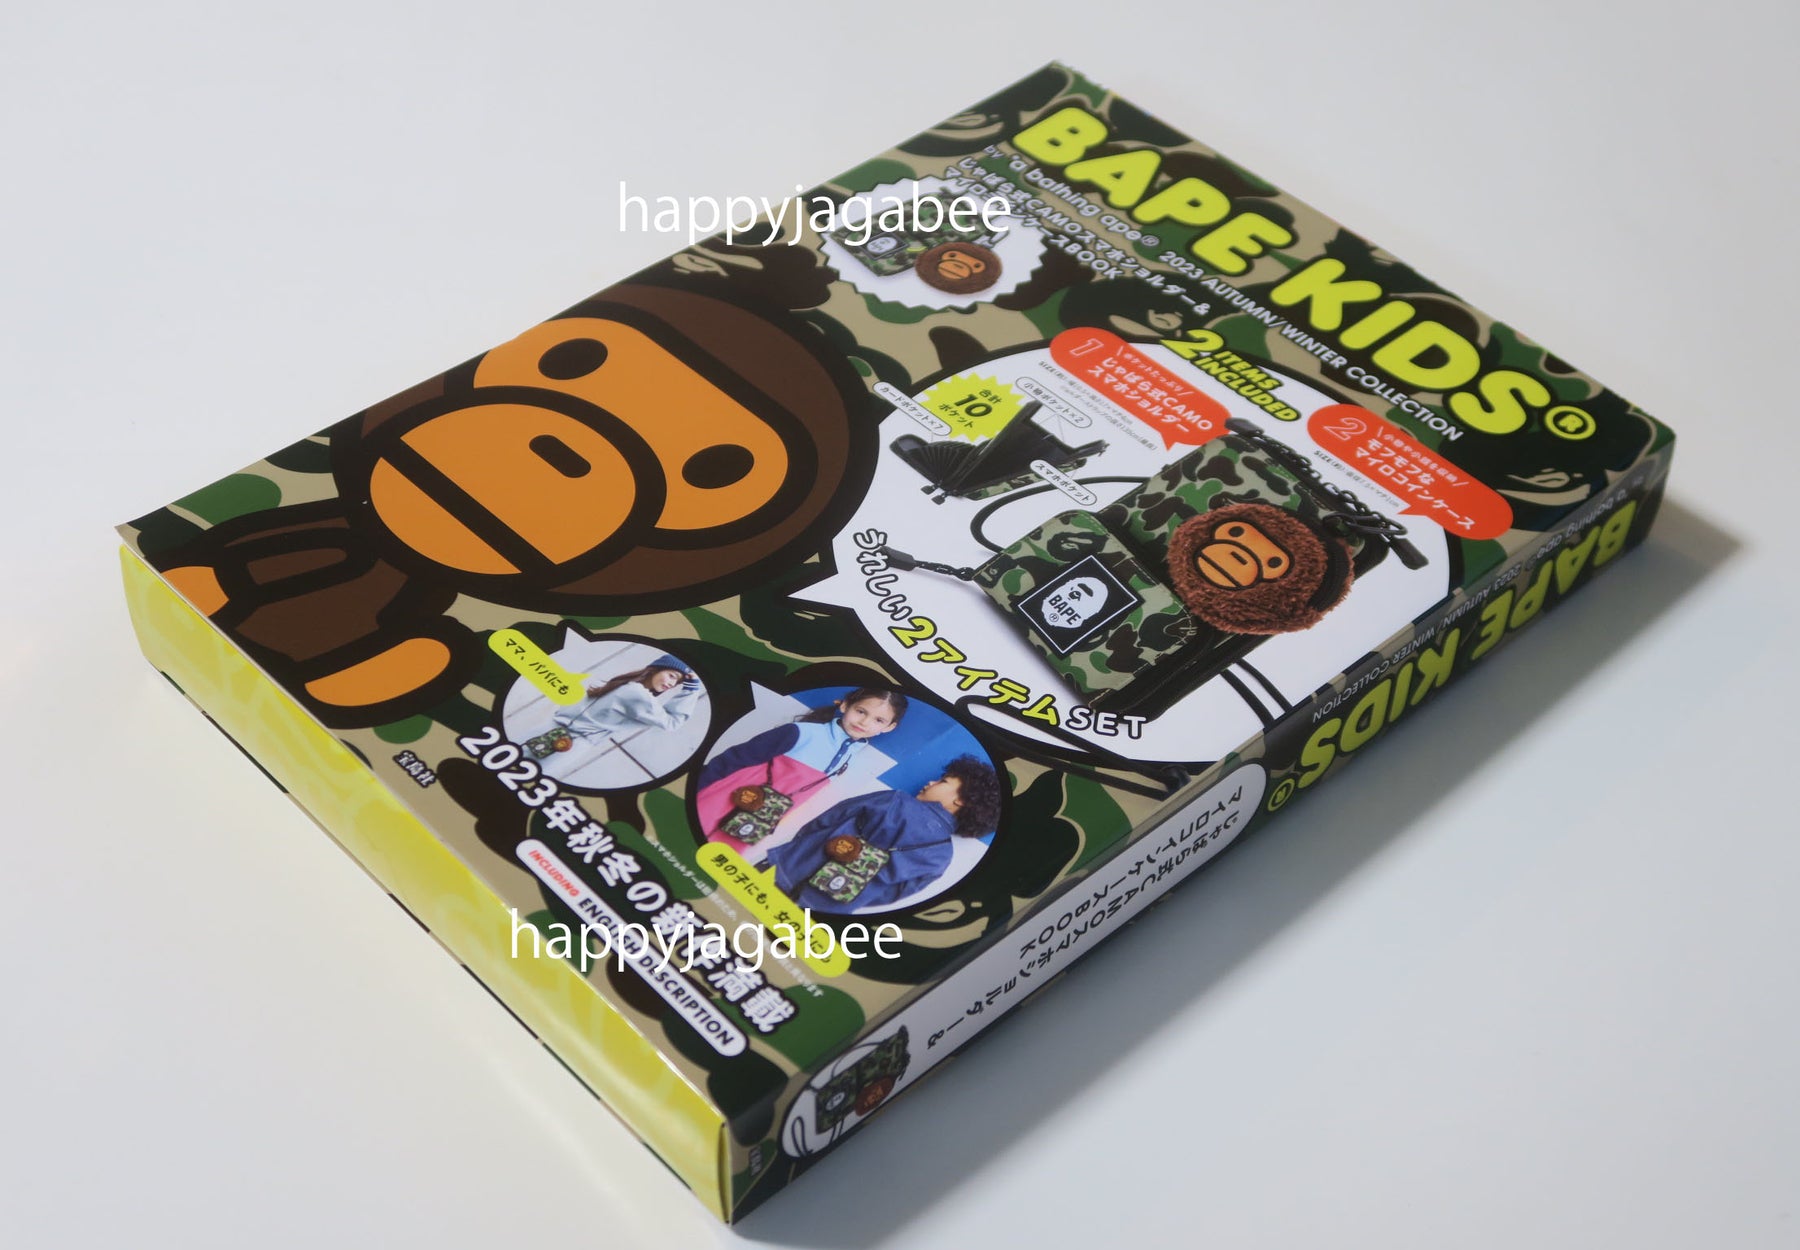 BAPE KIDS by *a bathing ape 2022 SPRING/SUMMER COLLECTION CAMOバックパック&マイロチャームBOOK [Book]